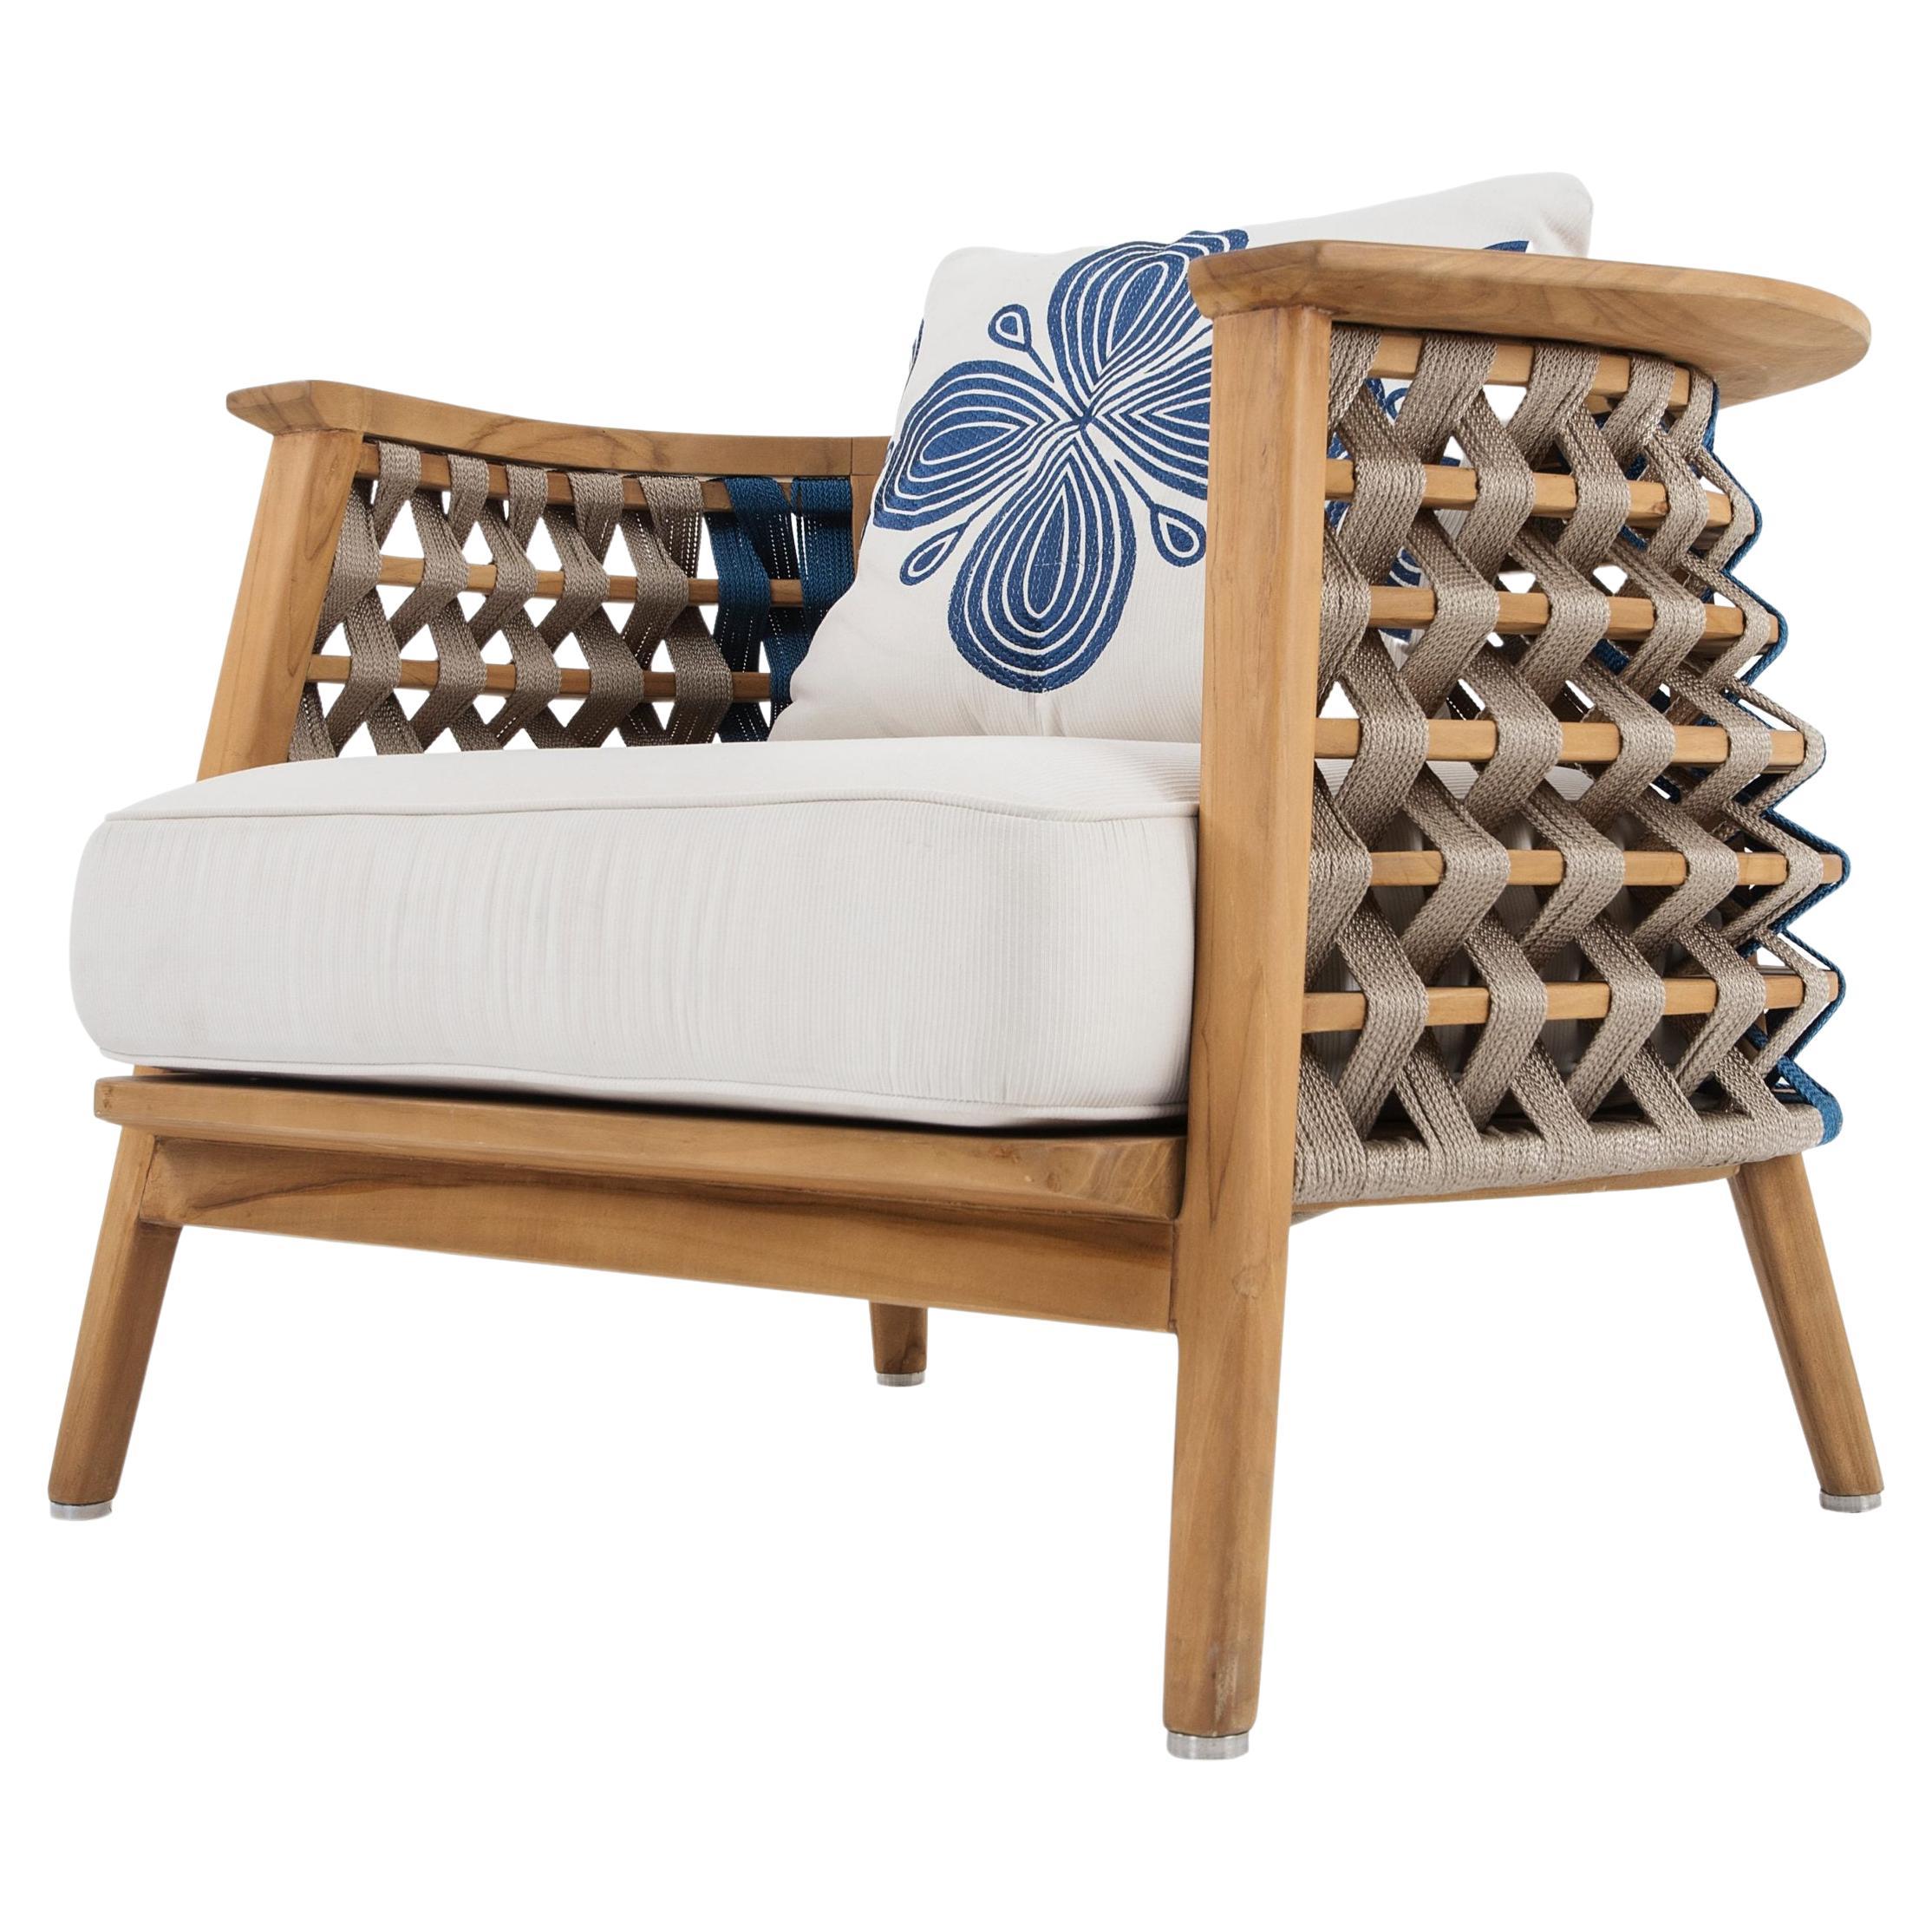 Structure: Teak wood – Aluminum: Antioxy, heavy load, anti-scratch easy clean.
Weaving: Round 4mm. High Tenacity, Low shrinkage filament yarn made of 100% polyester, easy clean.
Fixed Upholstery with high quality quick dry foam.
The Material: Our